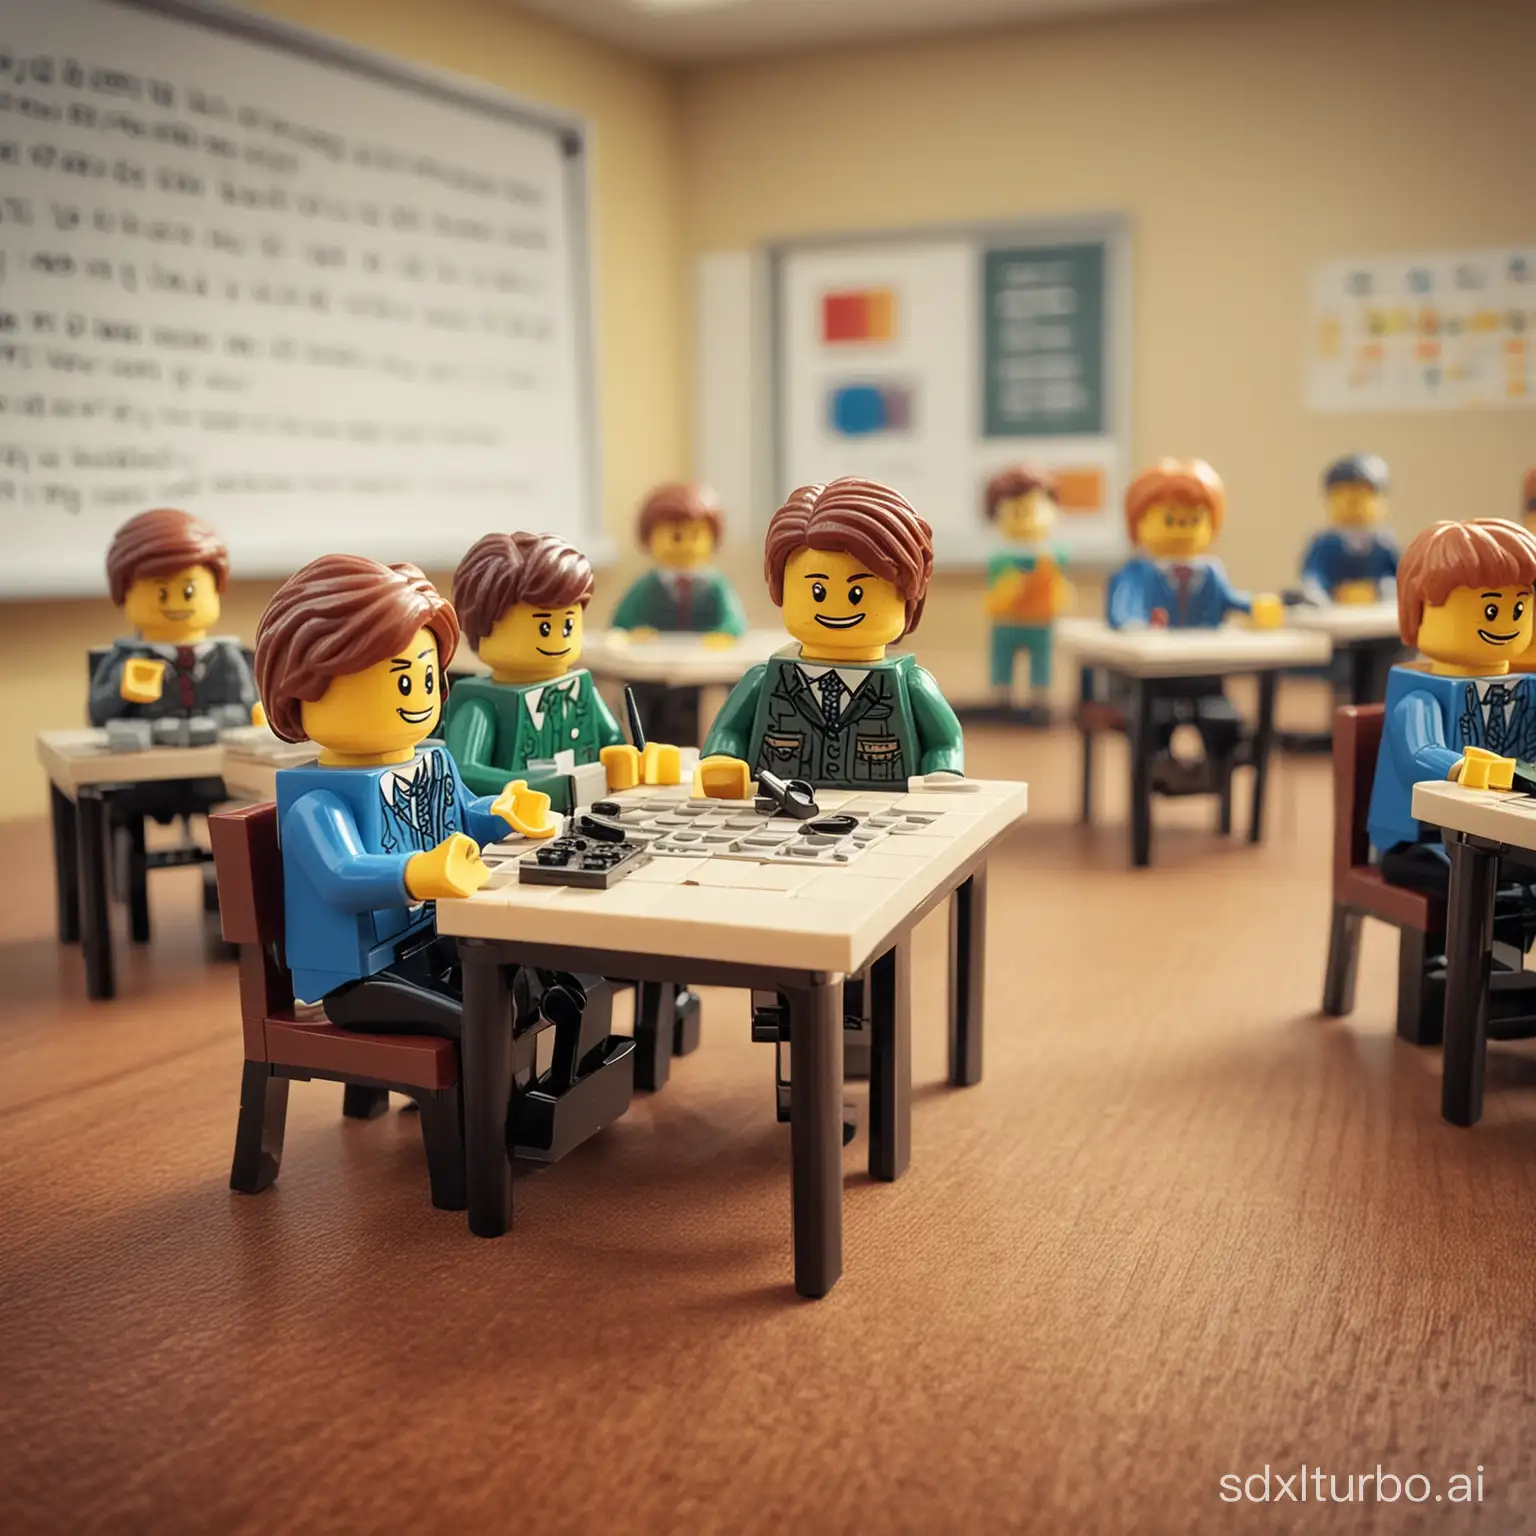 Lego-Figures-Learning-Mathematics-in-a-Classroom-Setting